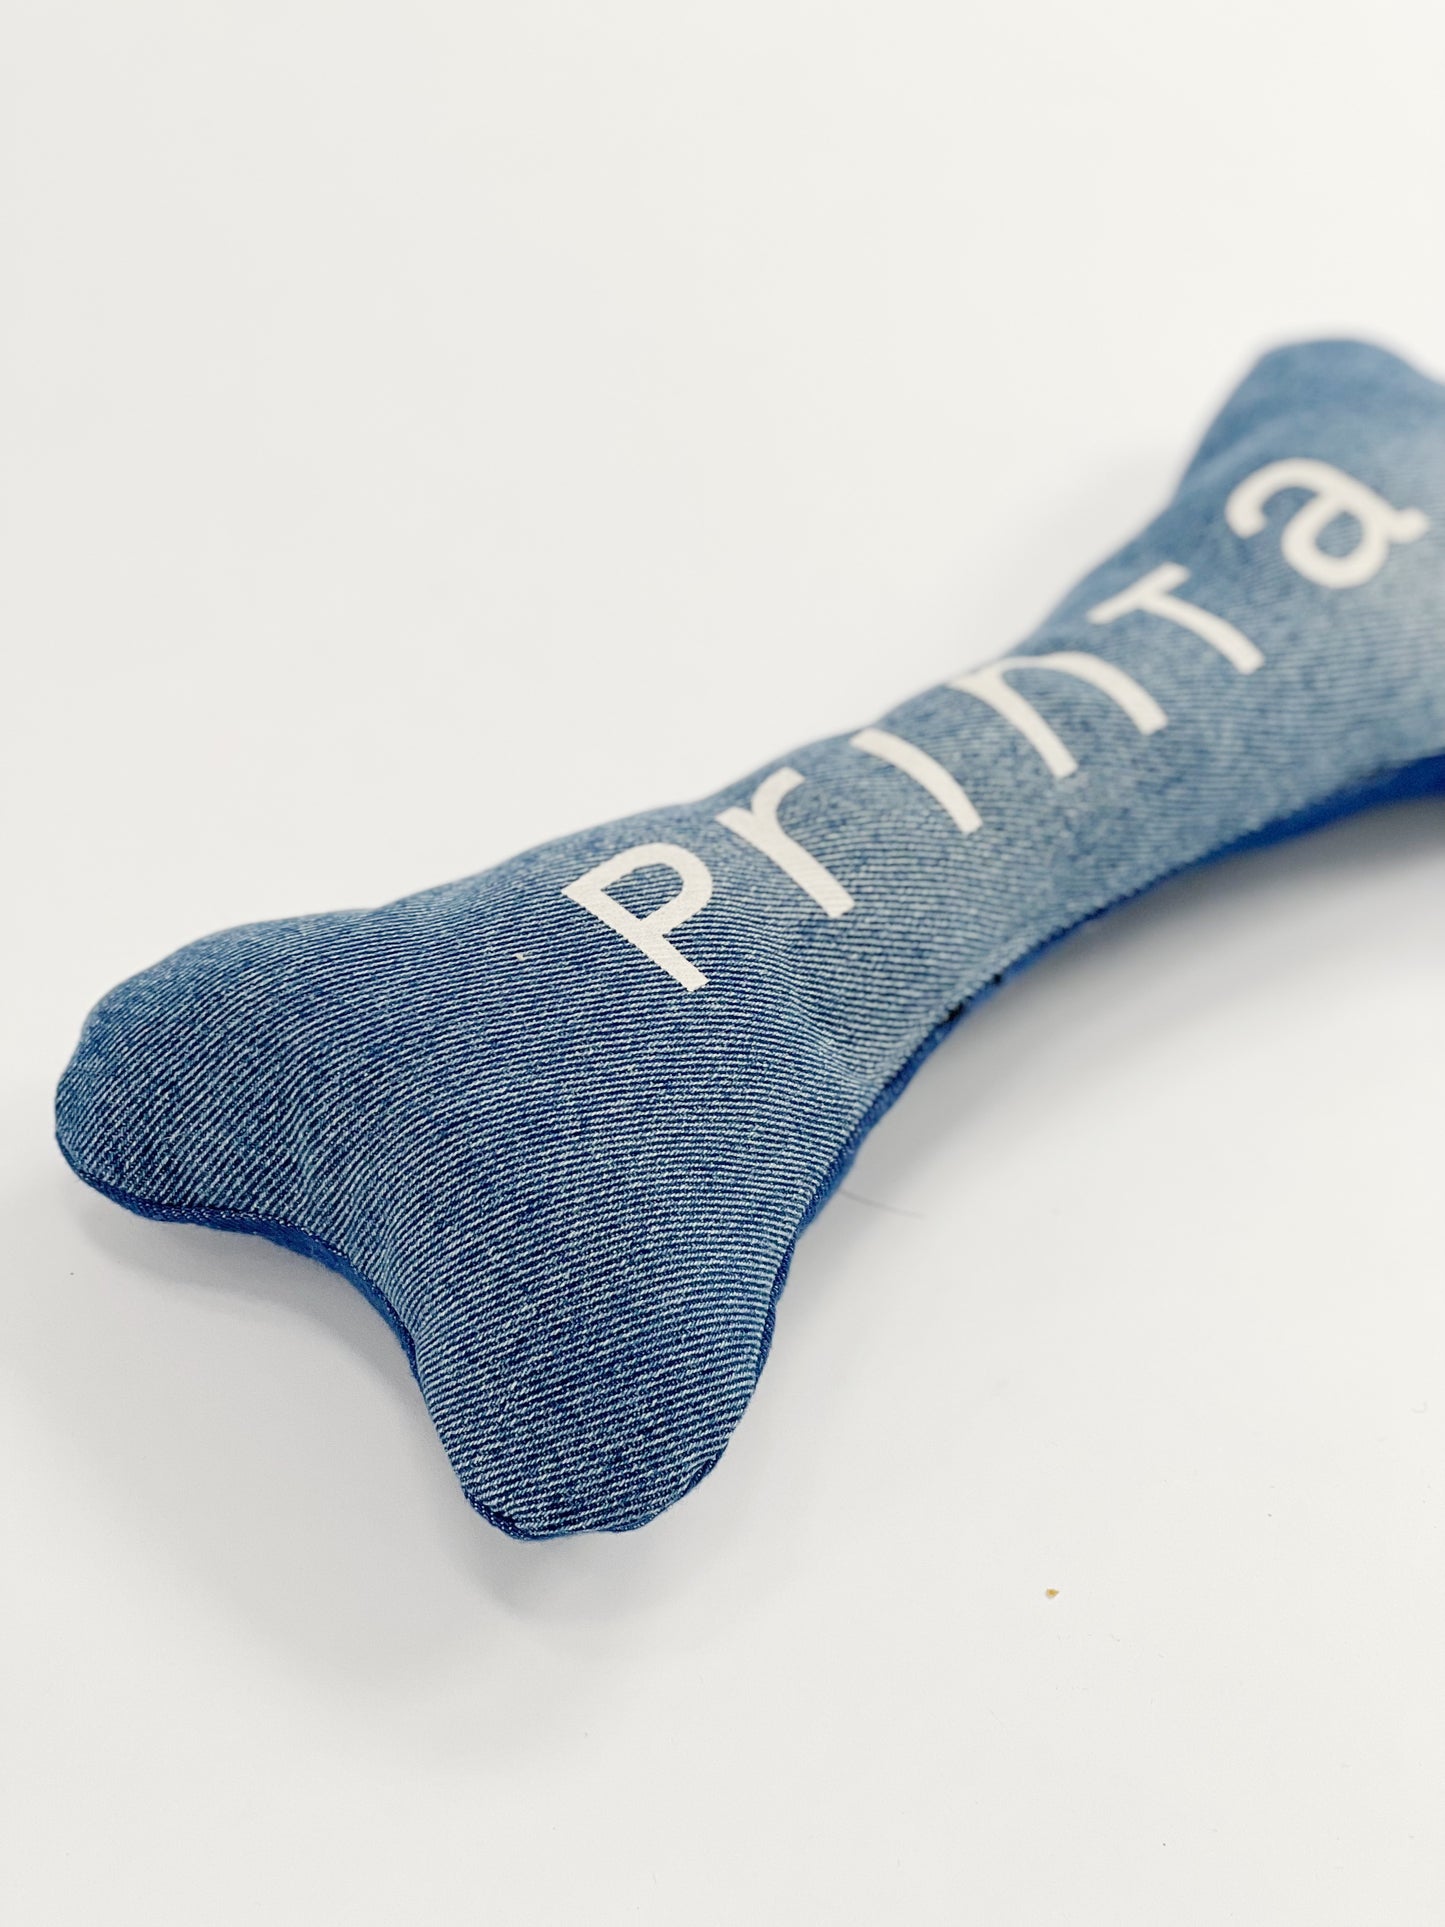 Bone shaped denim toy for dogs